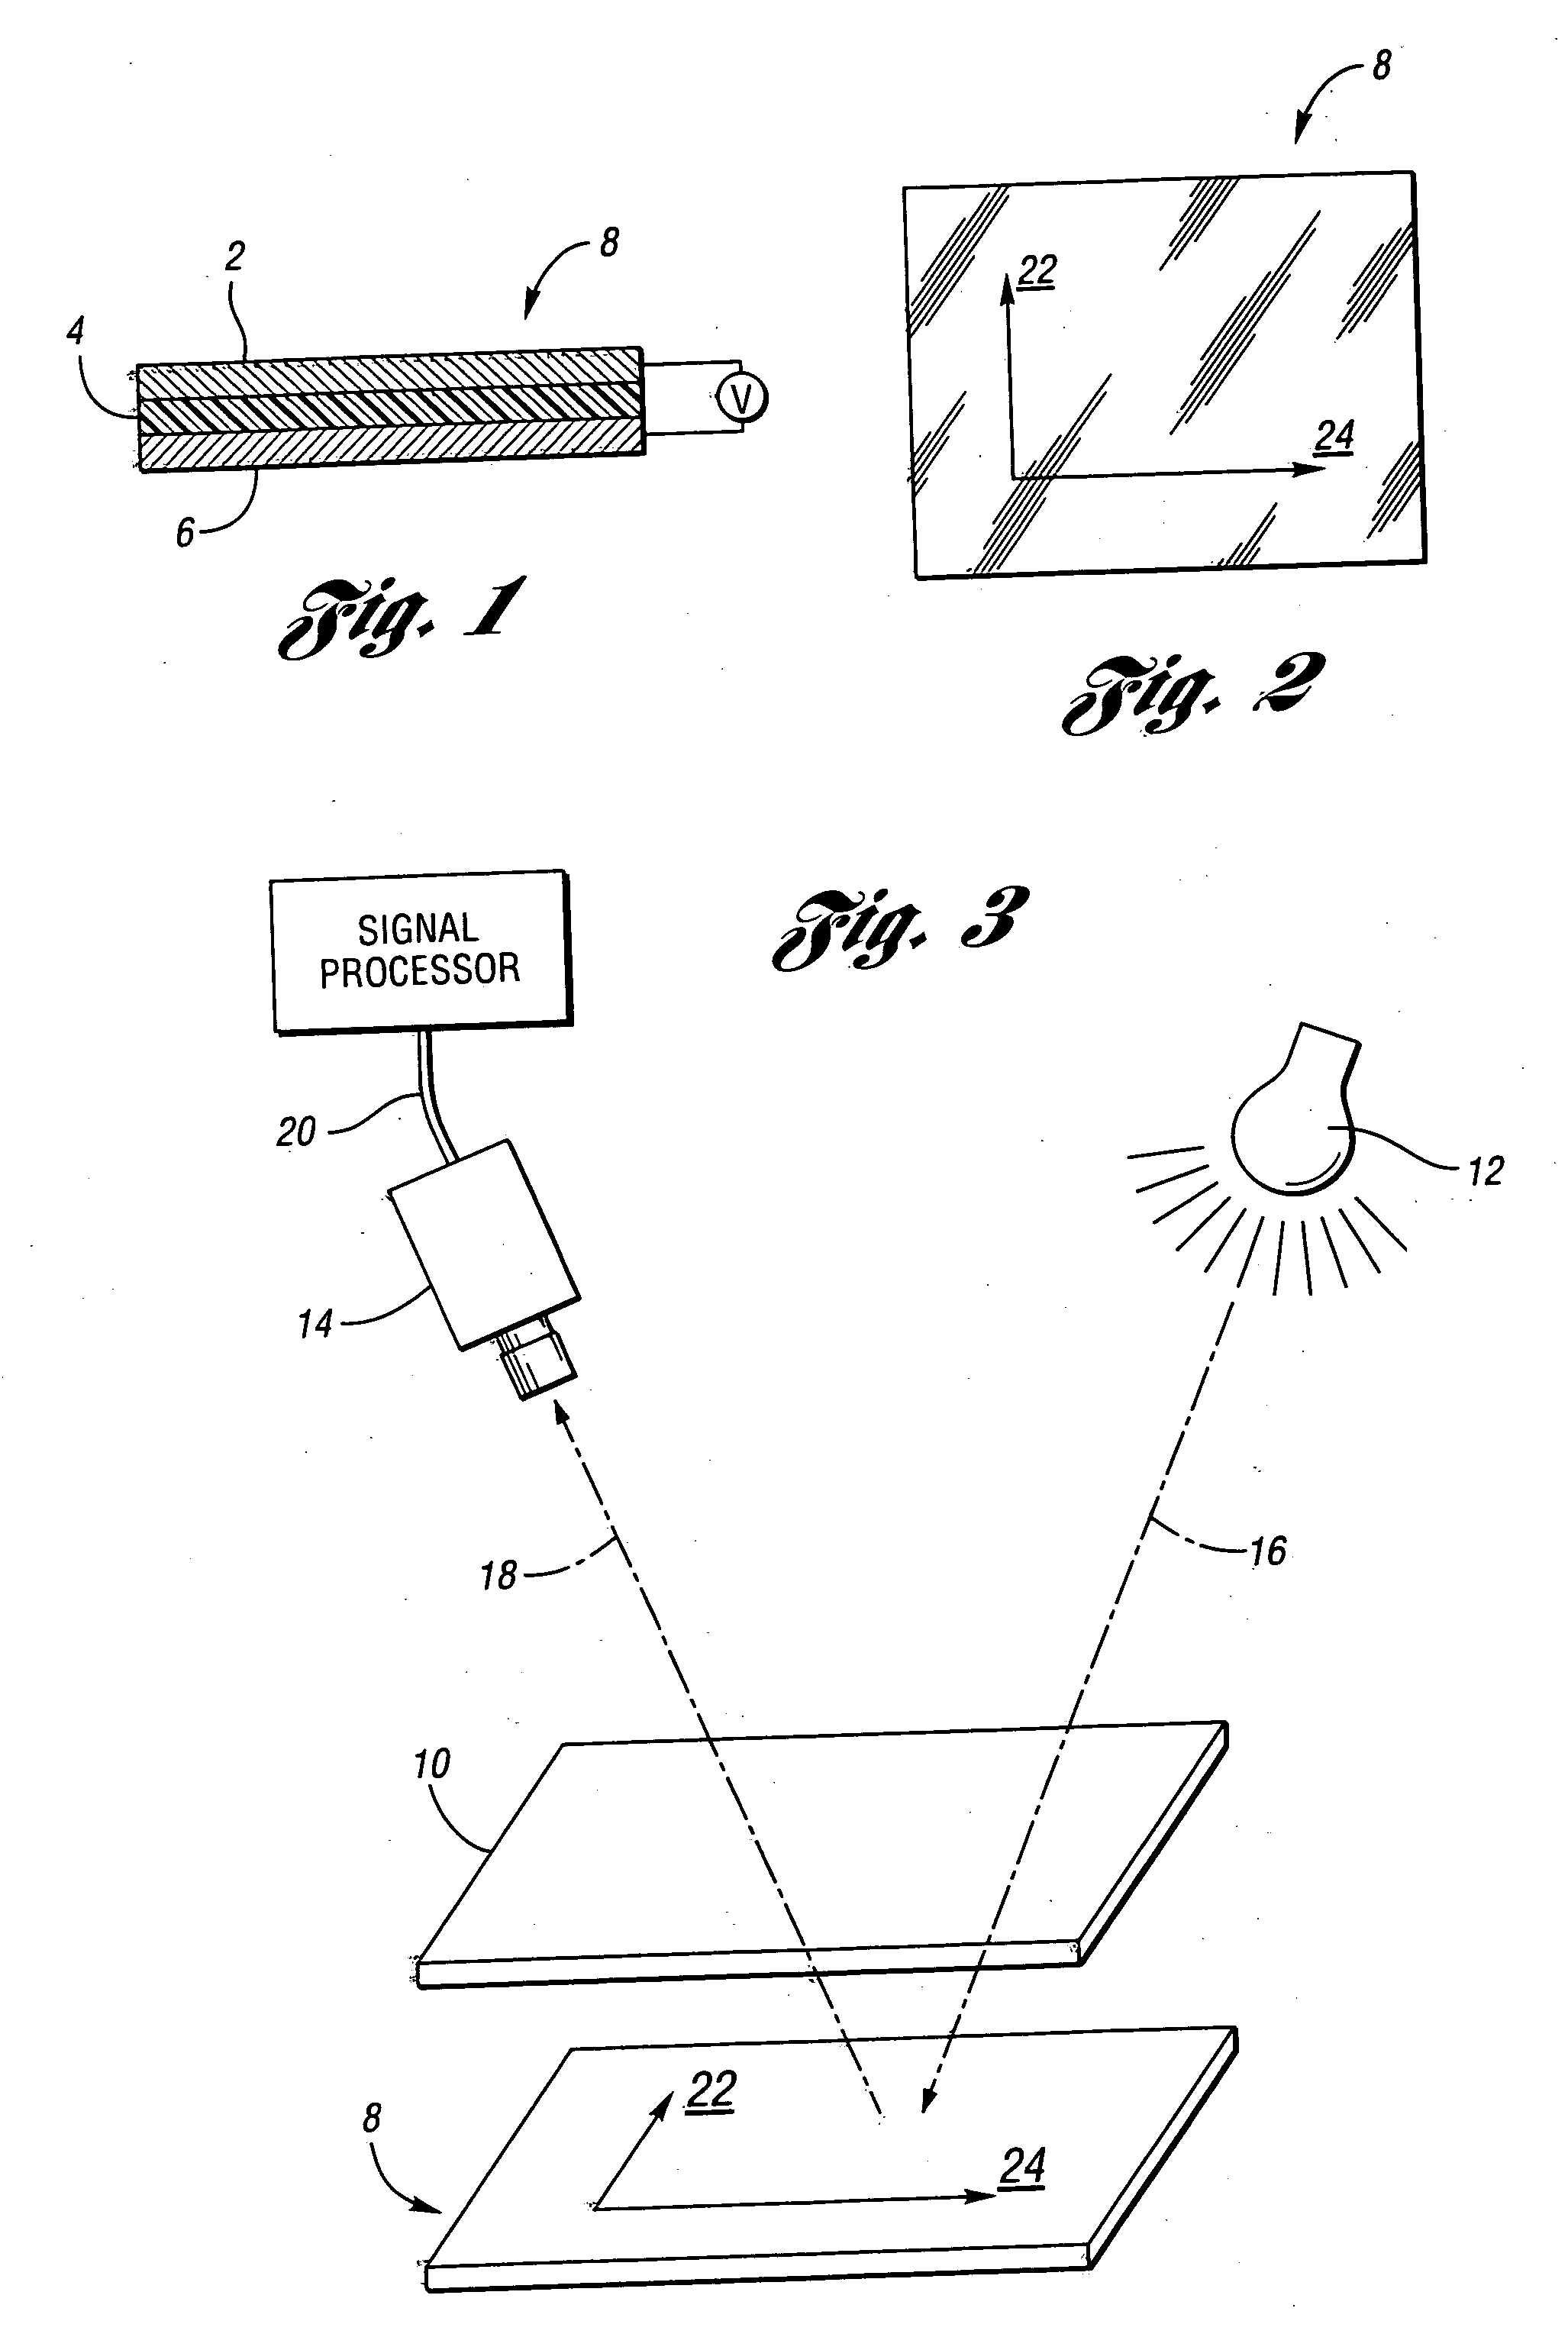 Method and system for automatically inspecting a display including a layer of liquid crystal material